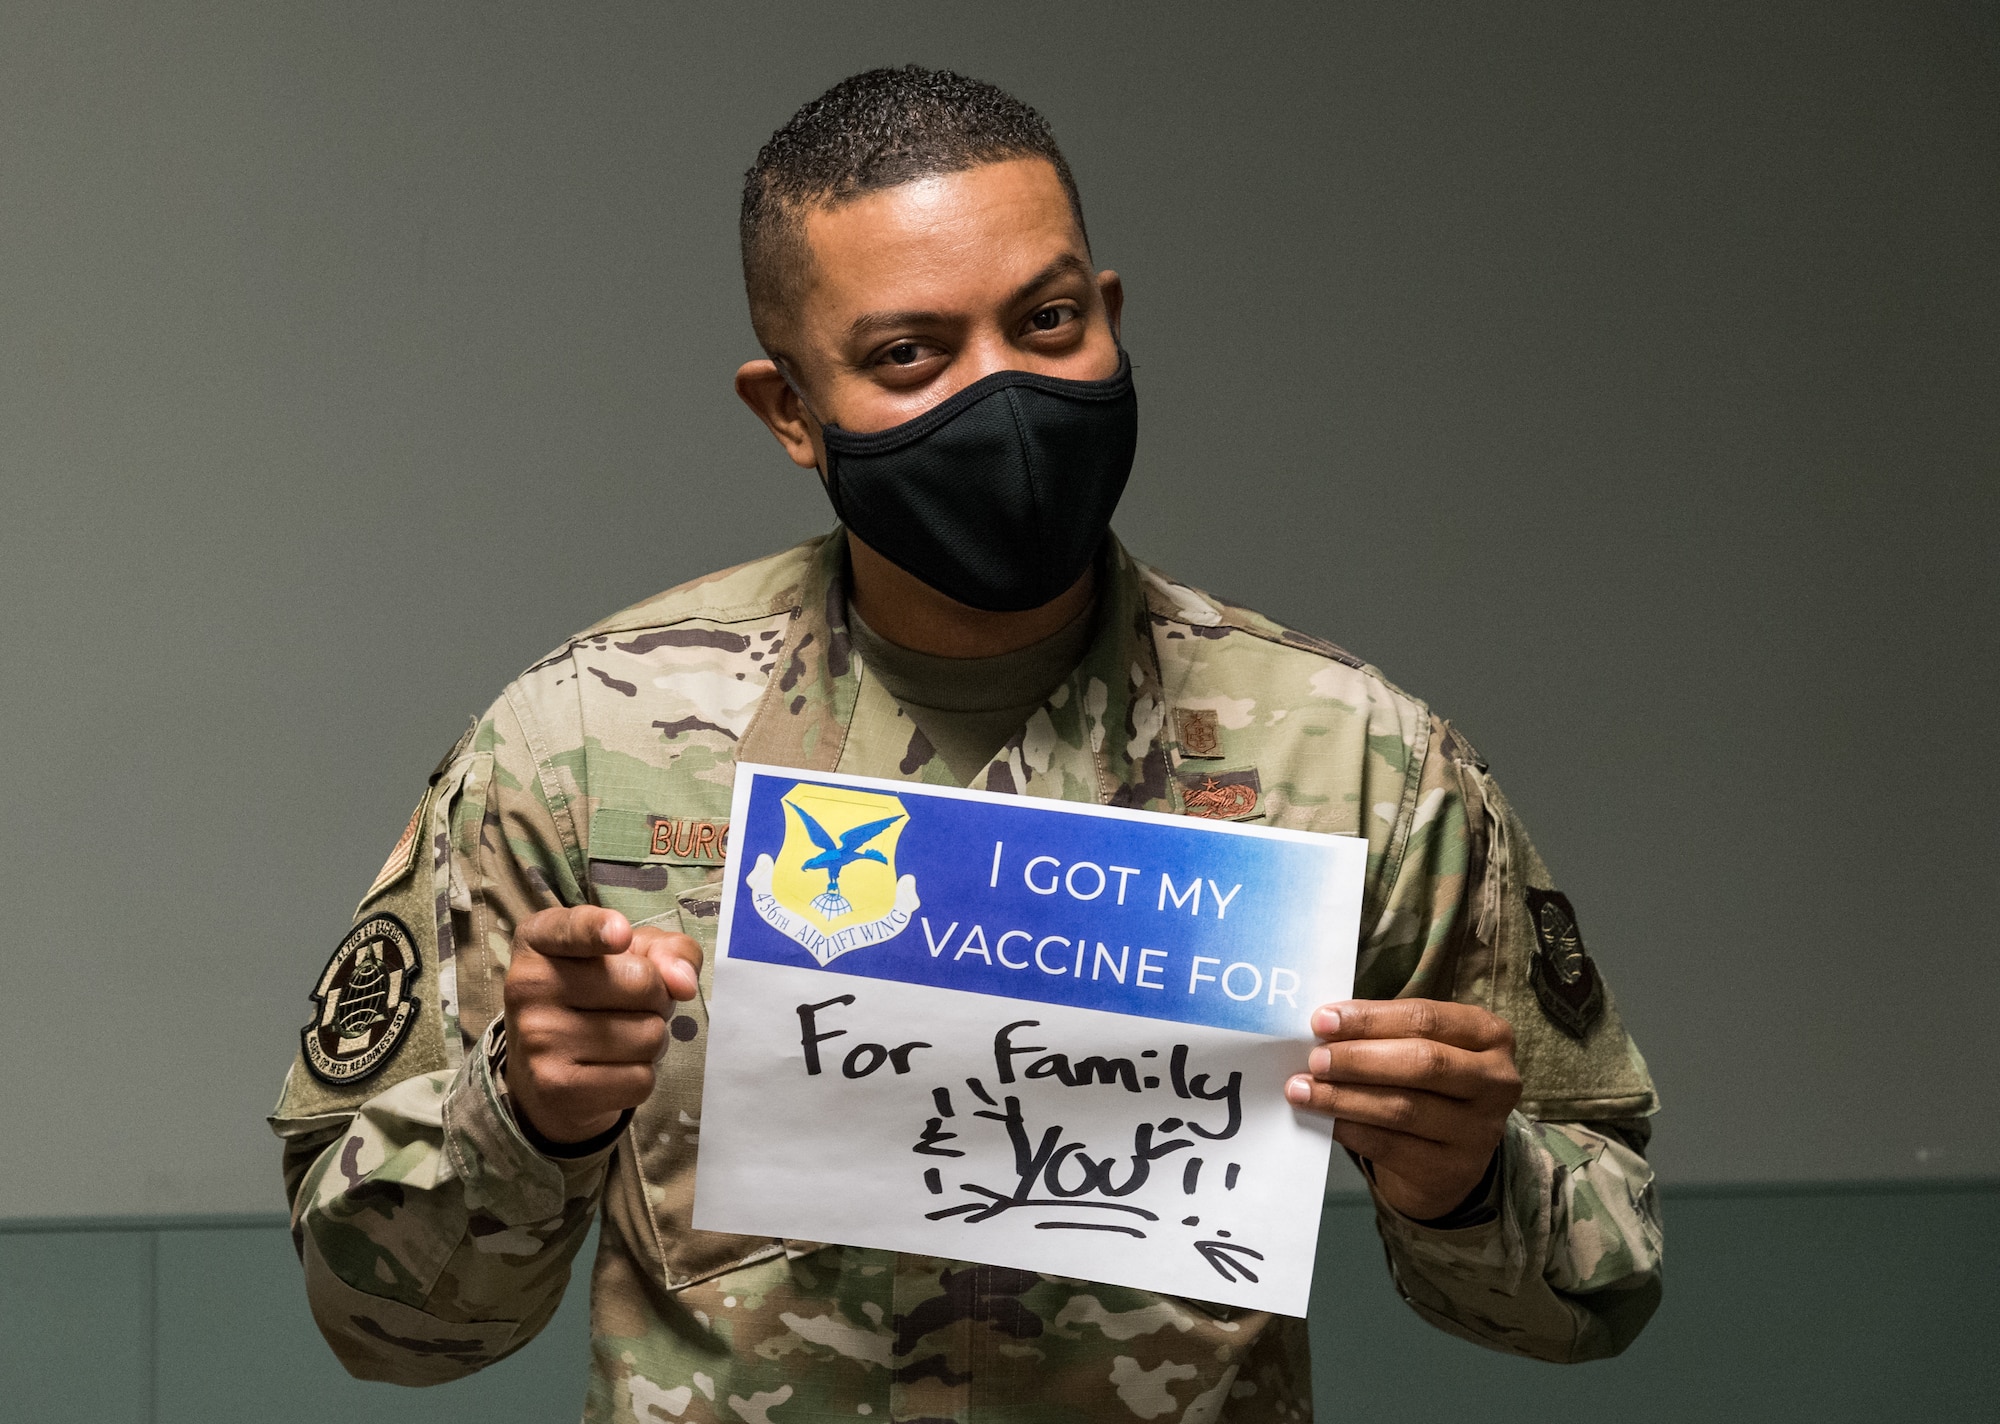 Master Sgt. Andrew Burgos, 436th Operational Medical Readiness Squadron mental health flight chief, displays a sign stating why he volunteered for the COVID-19 vaccine Jan. 20, 2021, at Dover Air Force Base, Delaware. Burgos was among the first Team Dover front-line workers who voluntarily received the vaccine in accordance with Department of Defense guidance. The vaccine was granted emergency use authorization by the U.S. Food and Drug Administration for use in prevention of COVID-19. (U.S. Air Force photo by Roland Balik)